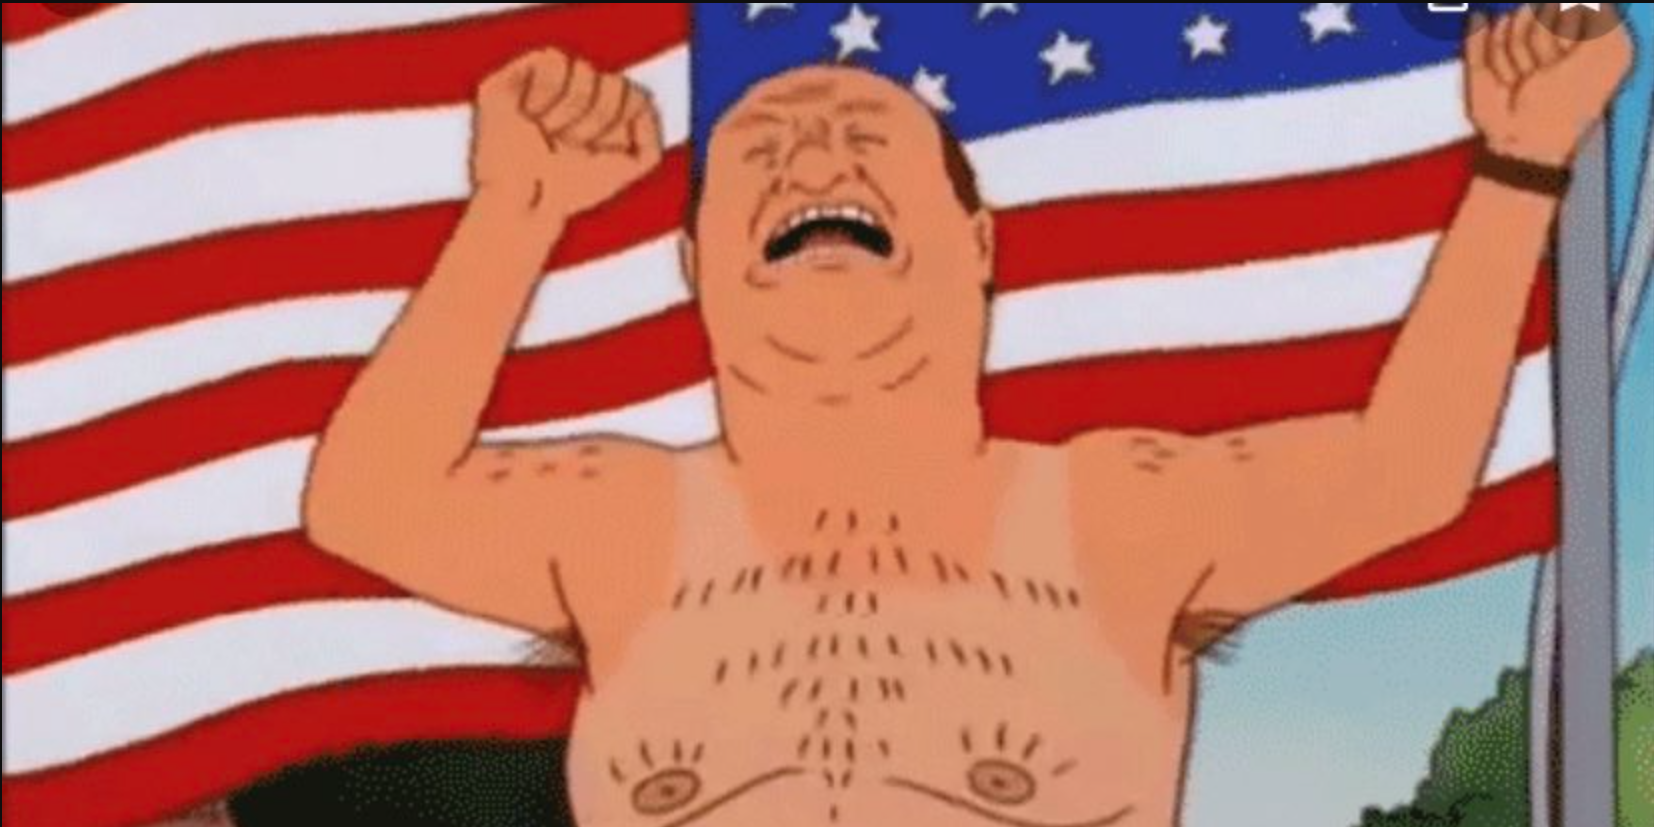 Bill Dauterive in front of the American flag